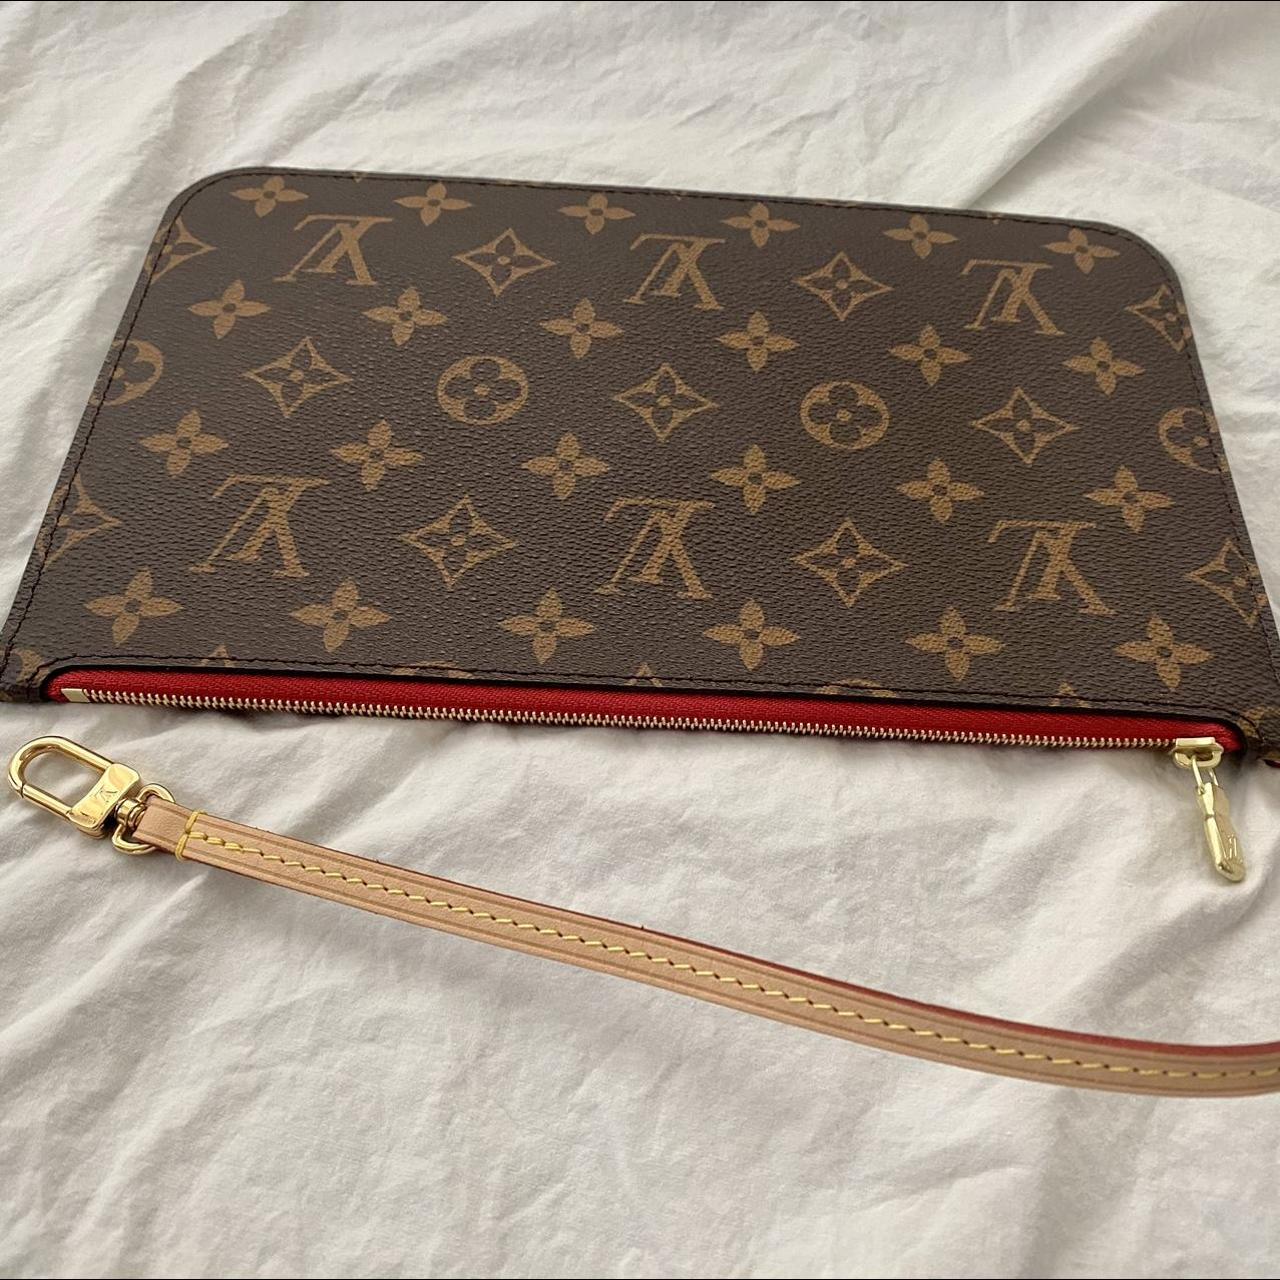 Brand New never been used Louis Vuitton Bag & - Depop